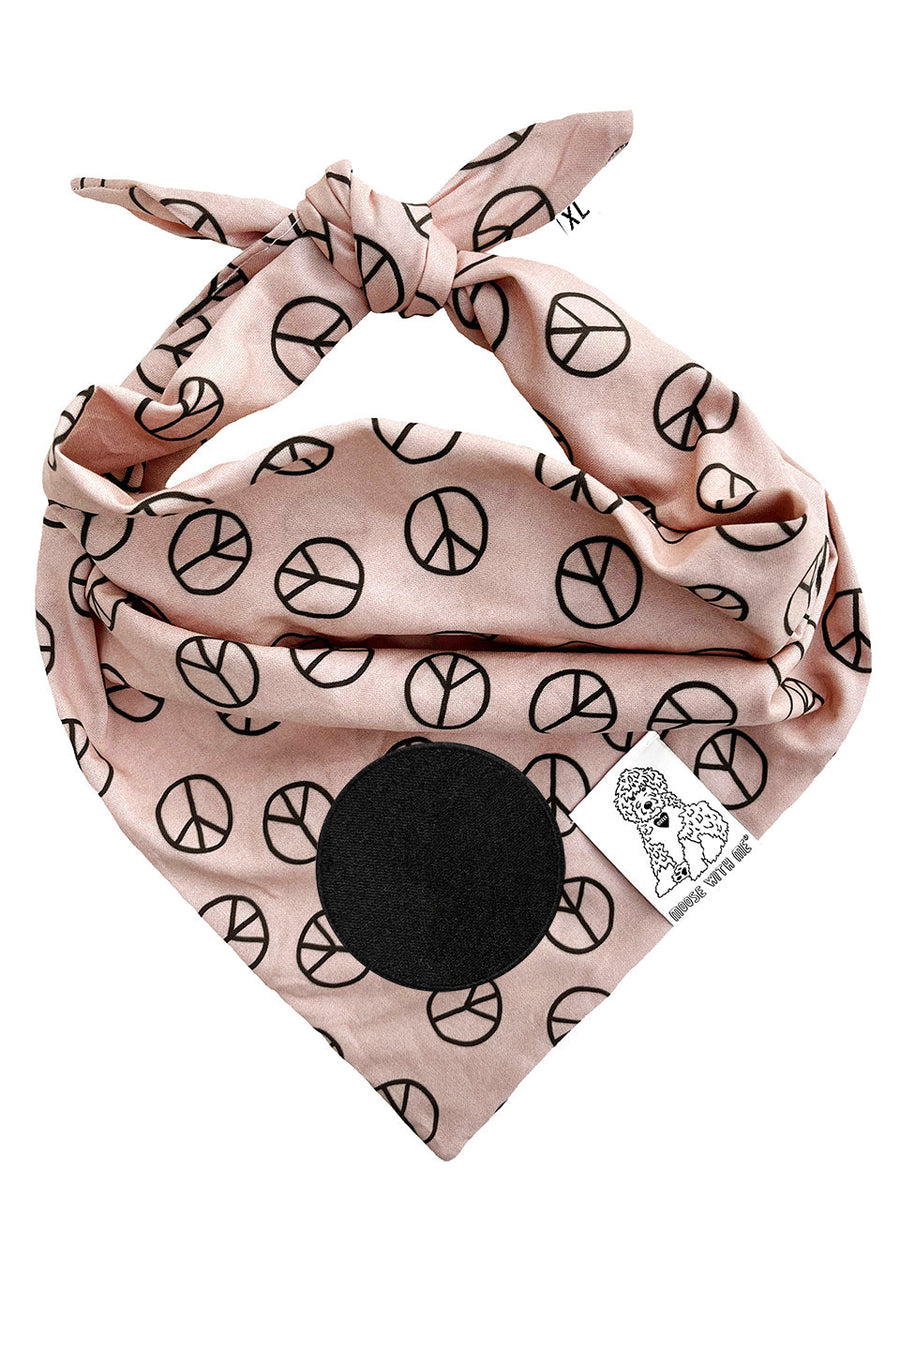 Dog Bandana Peace Sign - Customize with Interchangeable Velcro Patches